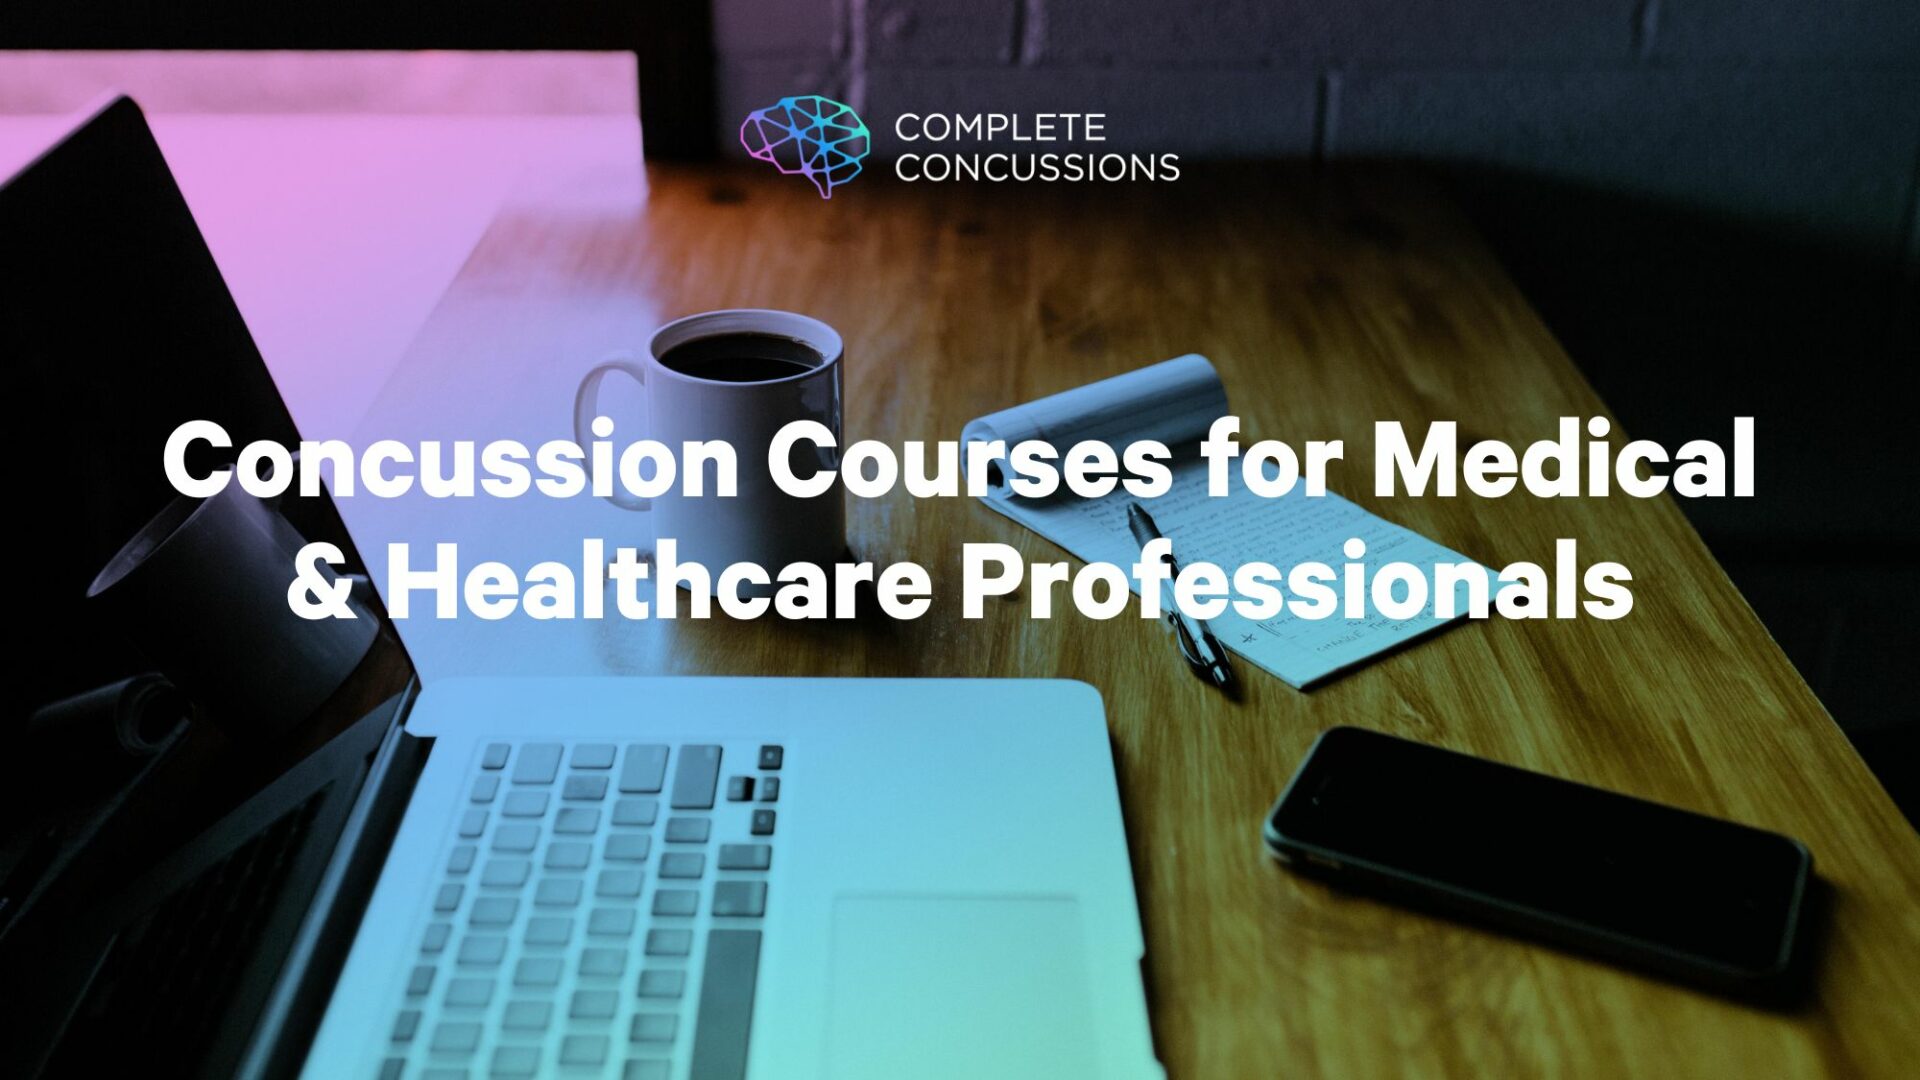 Concussion Courses for Medical & Healthcare Professionals